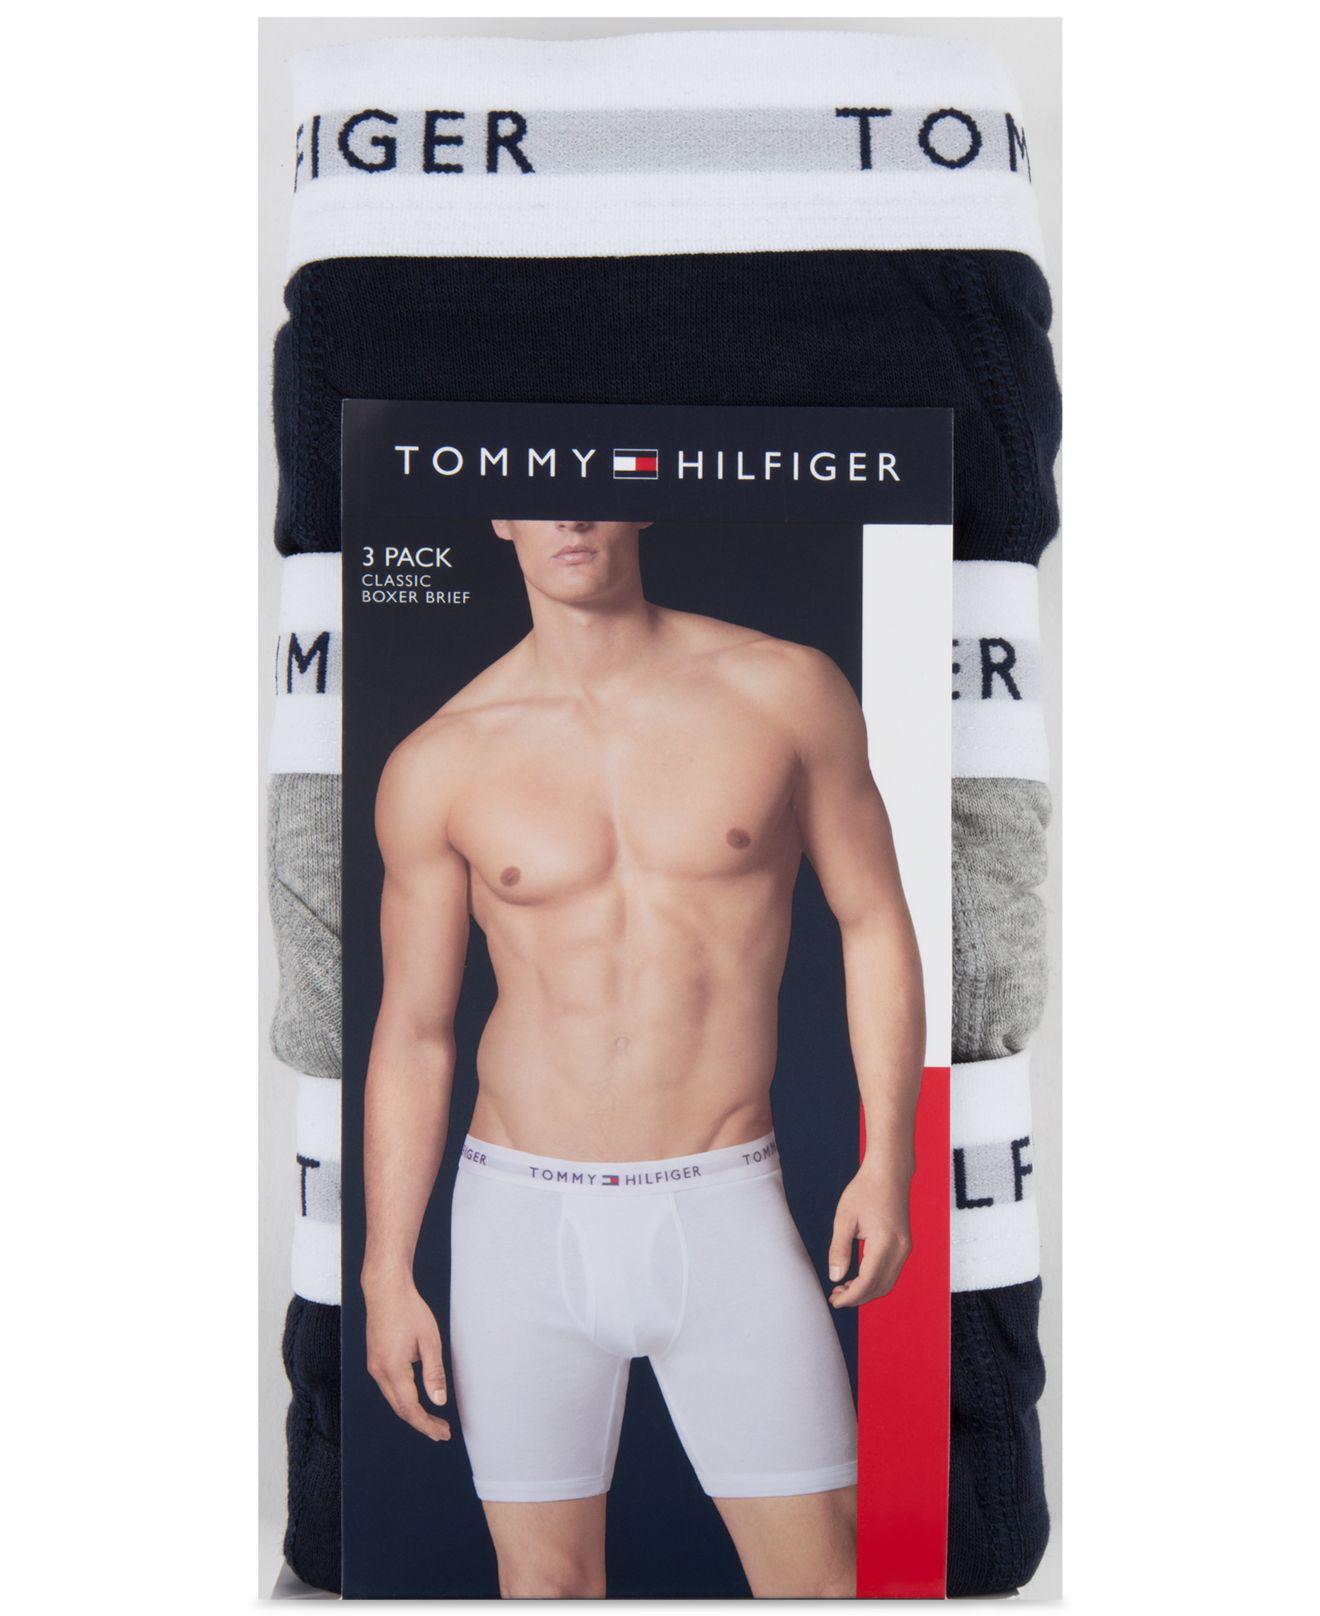 Clothing Men's Clothing Underwear Tommy Jeans Mens Burke 3 Pack Boxer  Shorts Clothing kubicolab.it